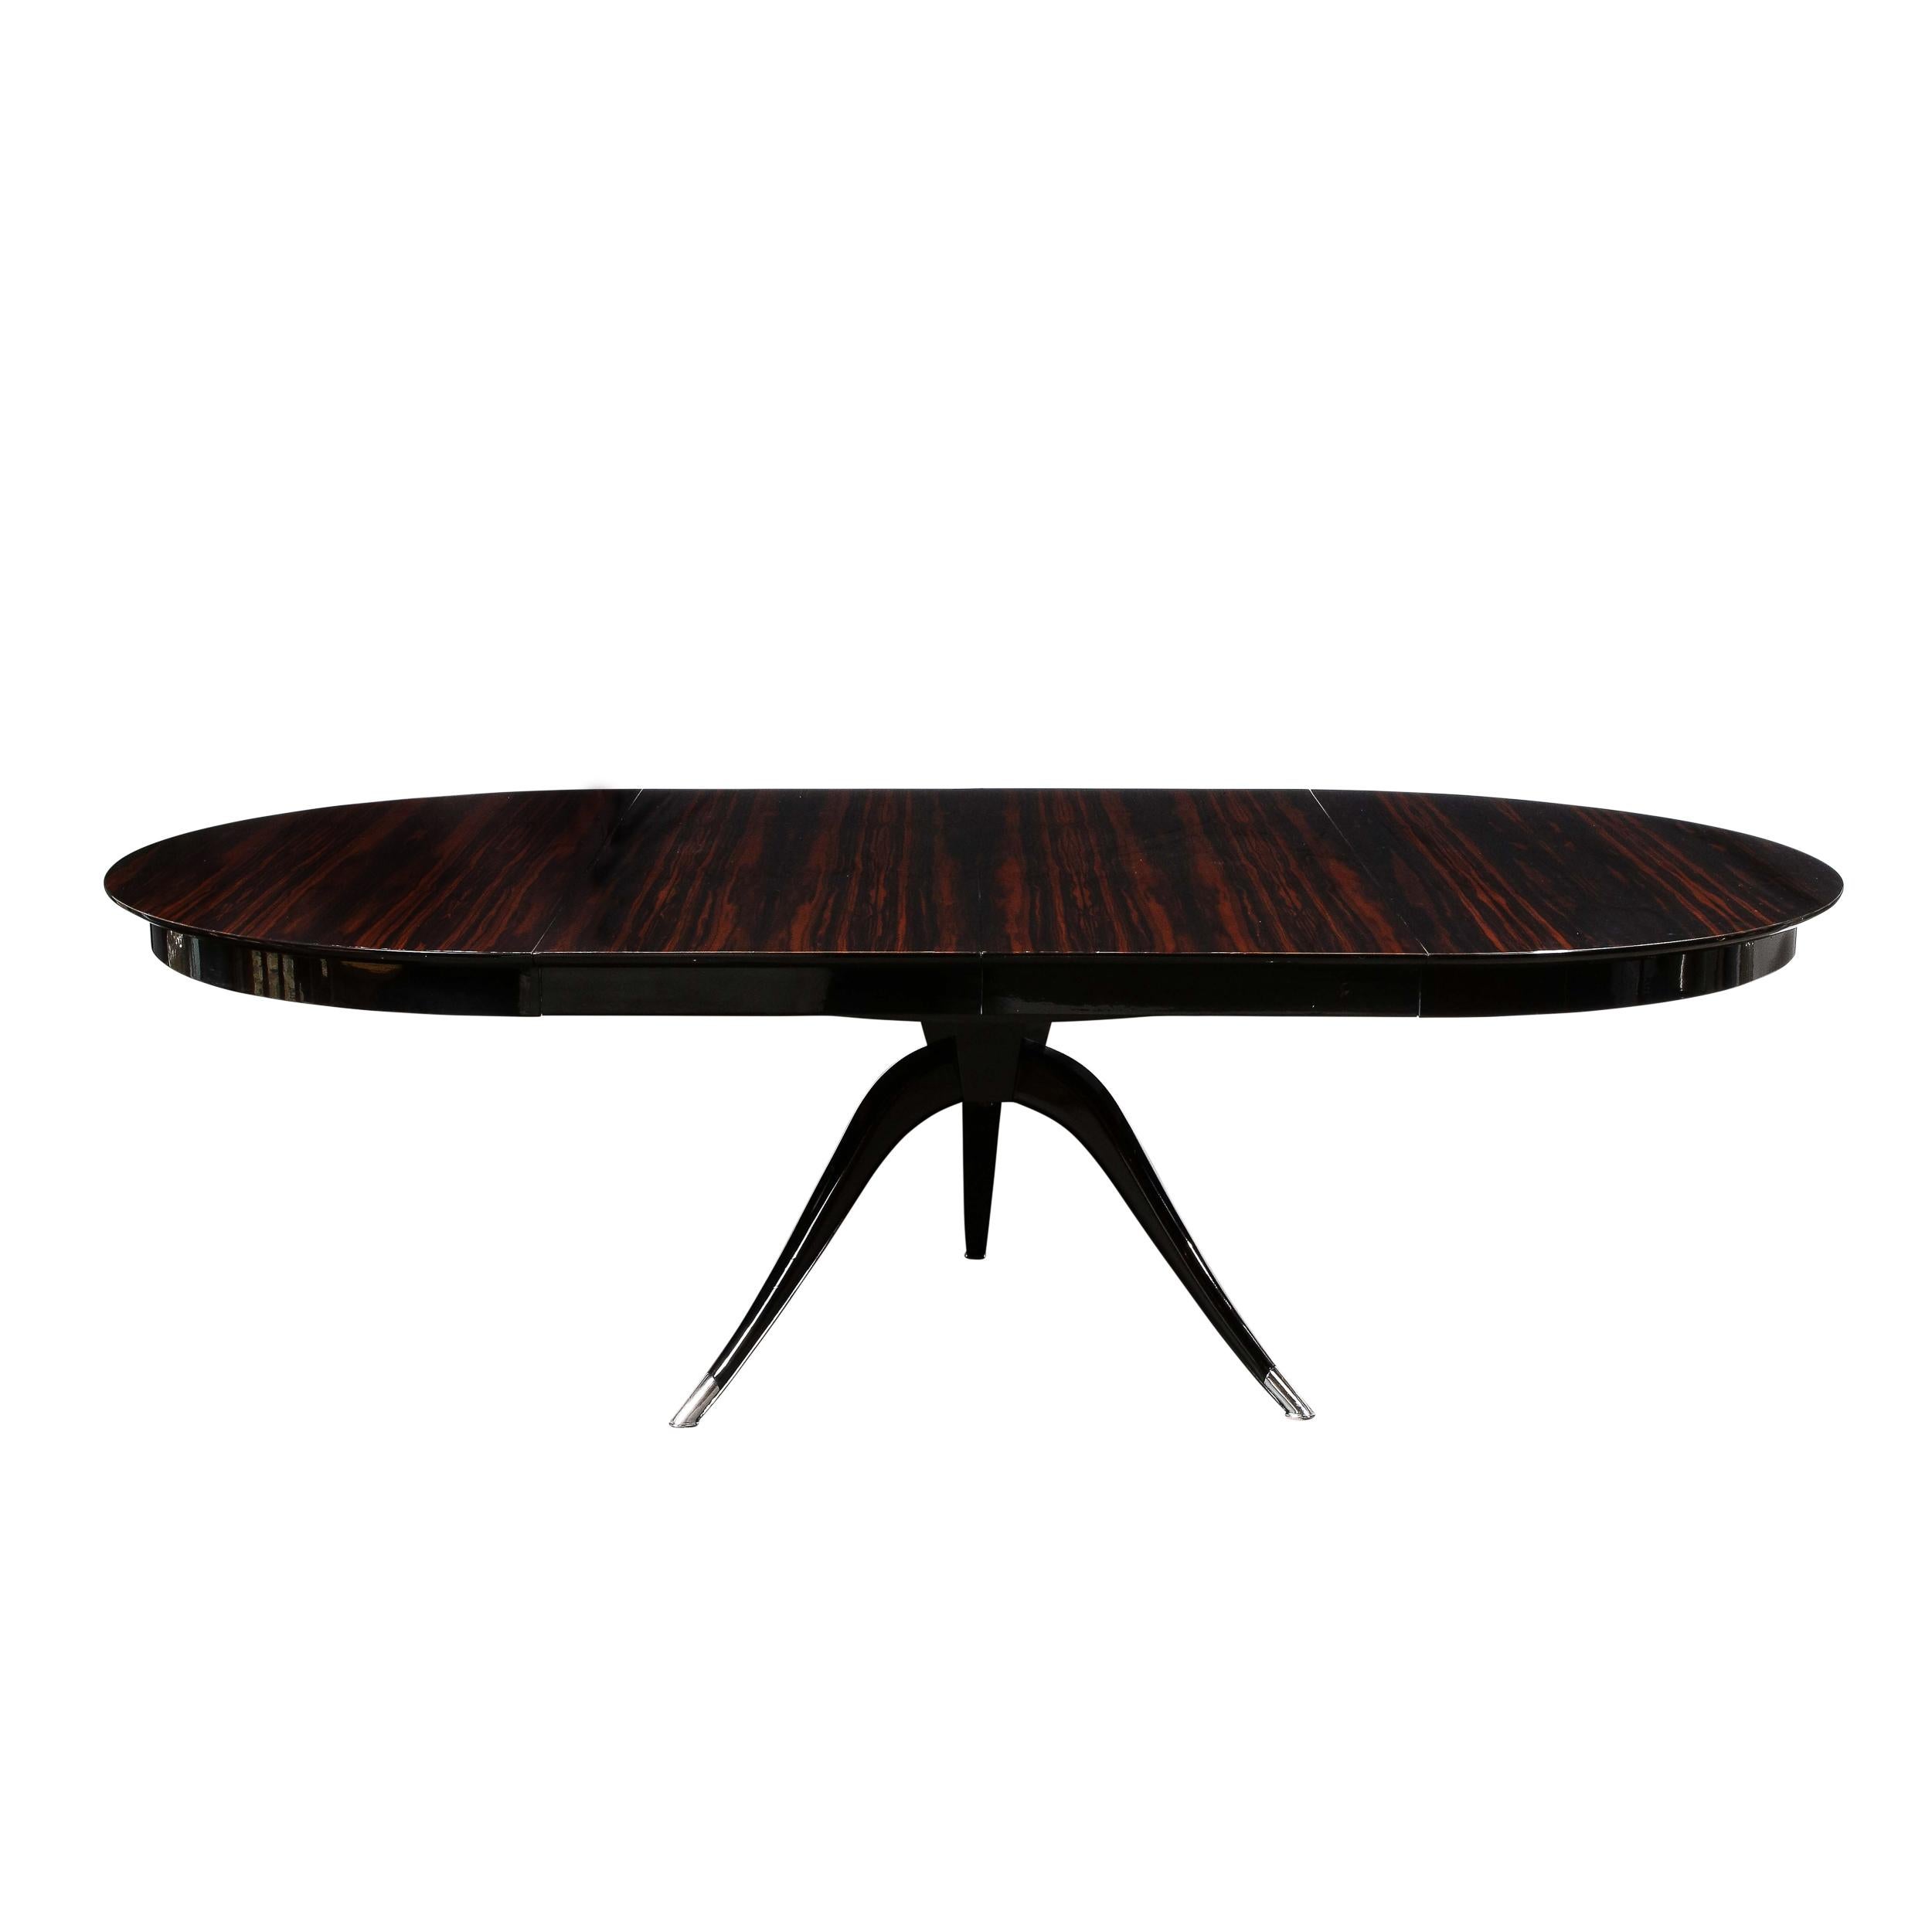 French Art Deco Style Extendable Round Dining Table in Macassar Ebony w/ Tapered Legs